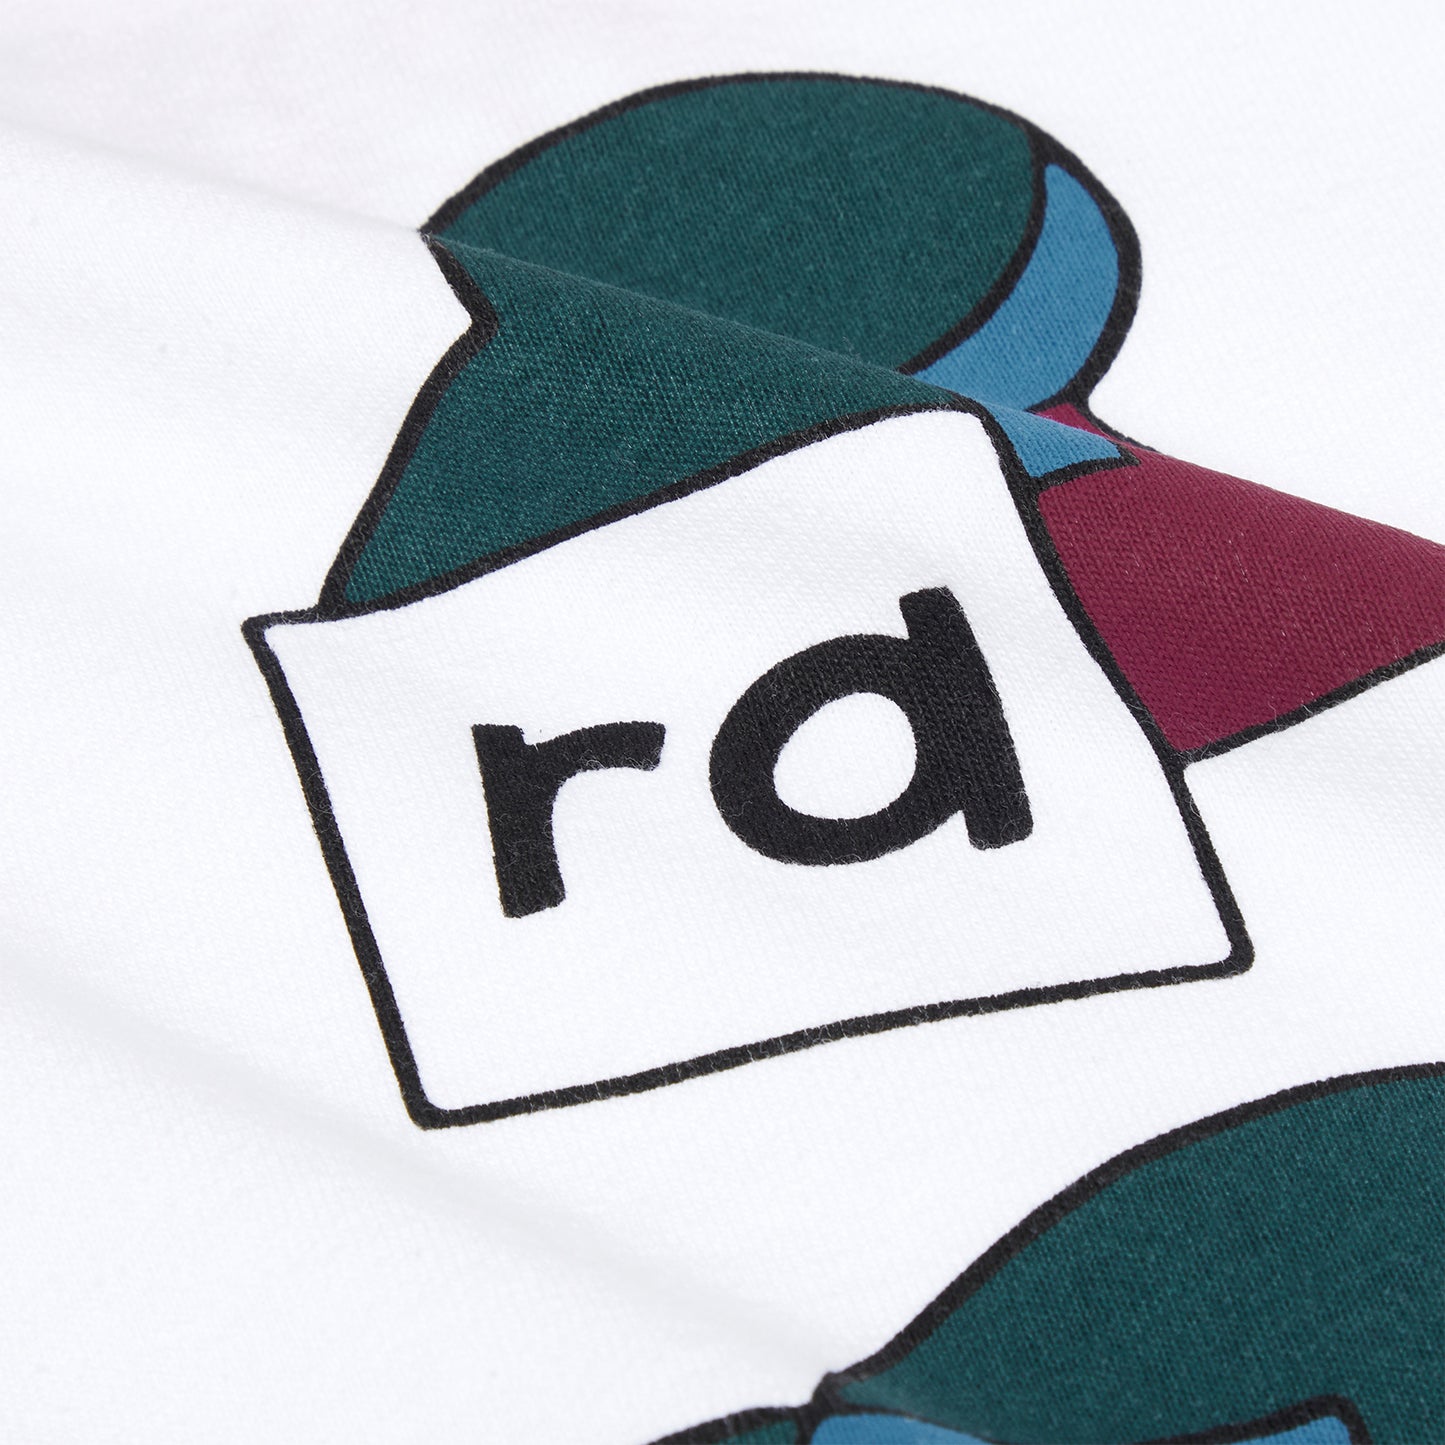 by Parra Rug Pull T-Shirt (White)